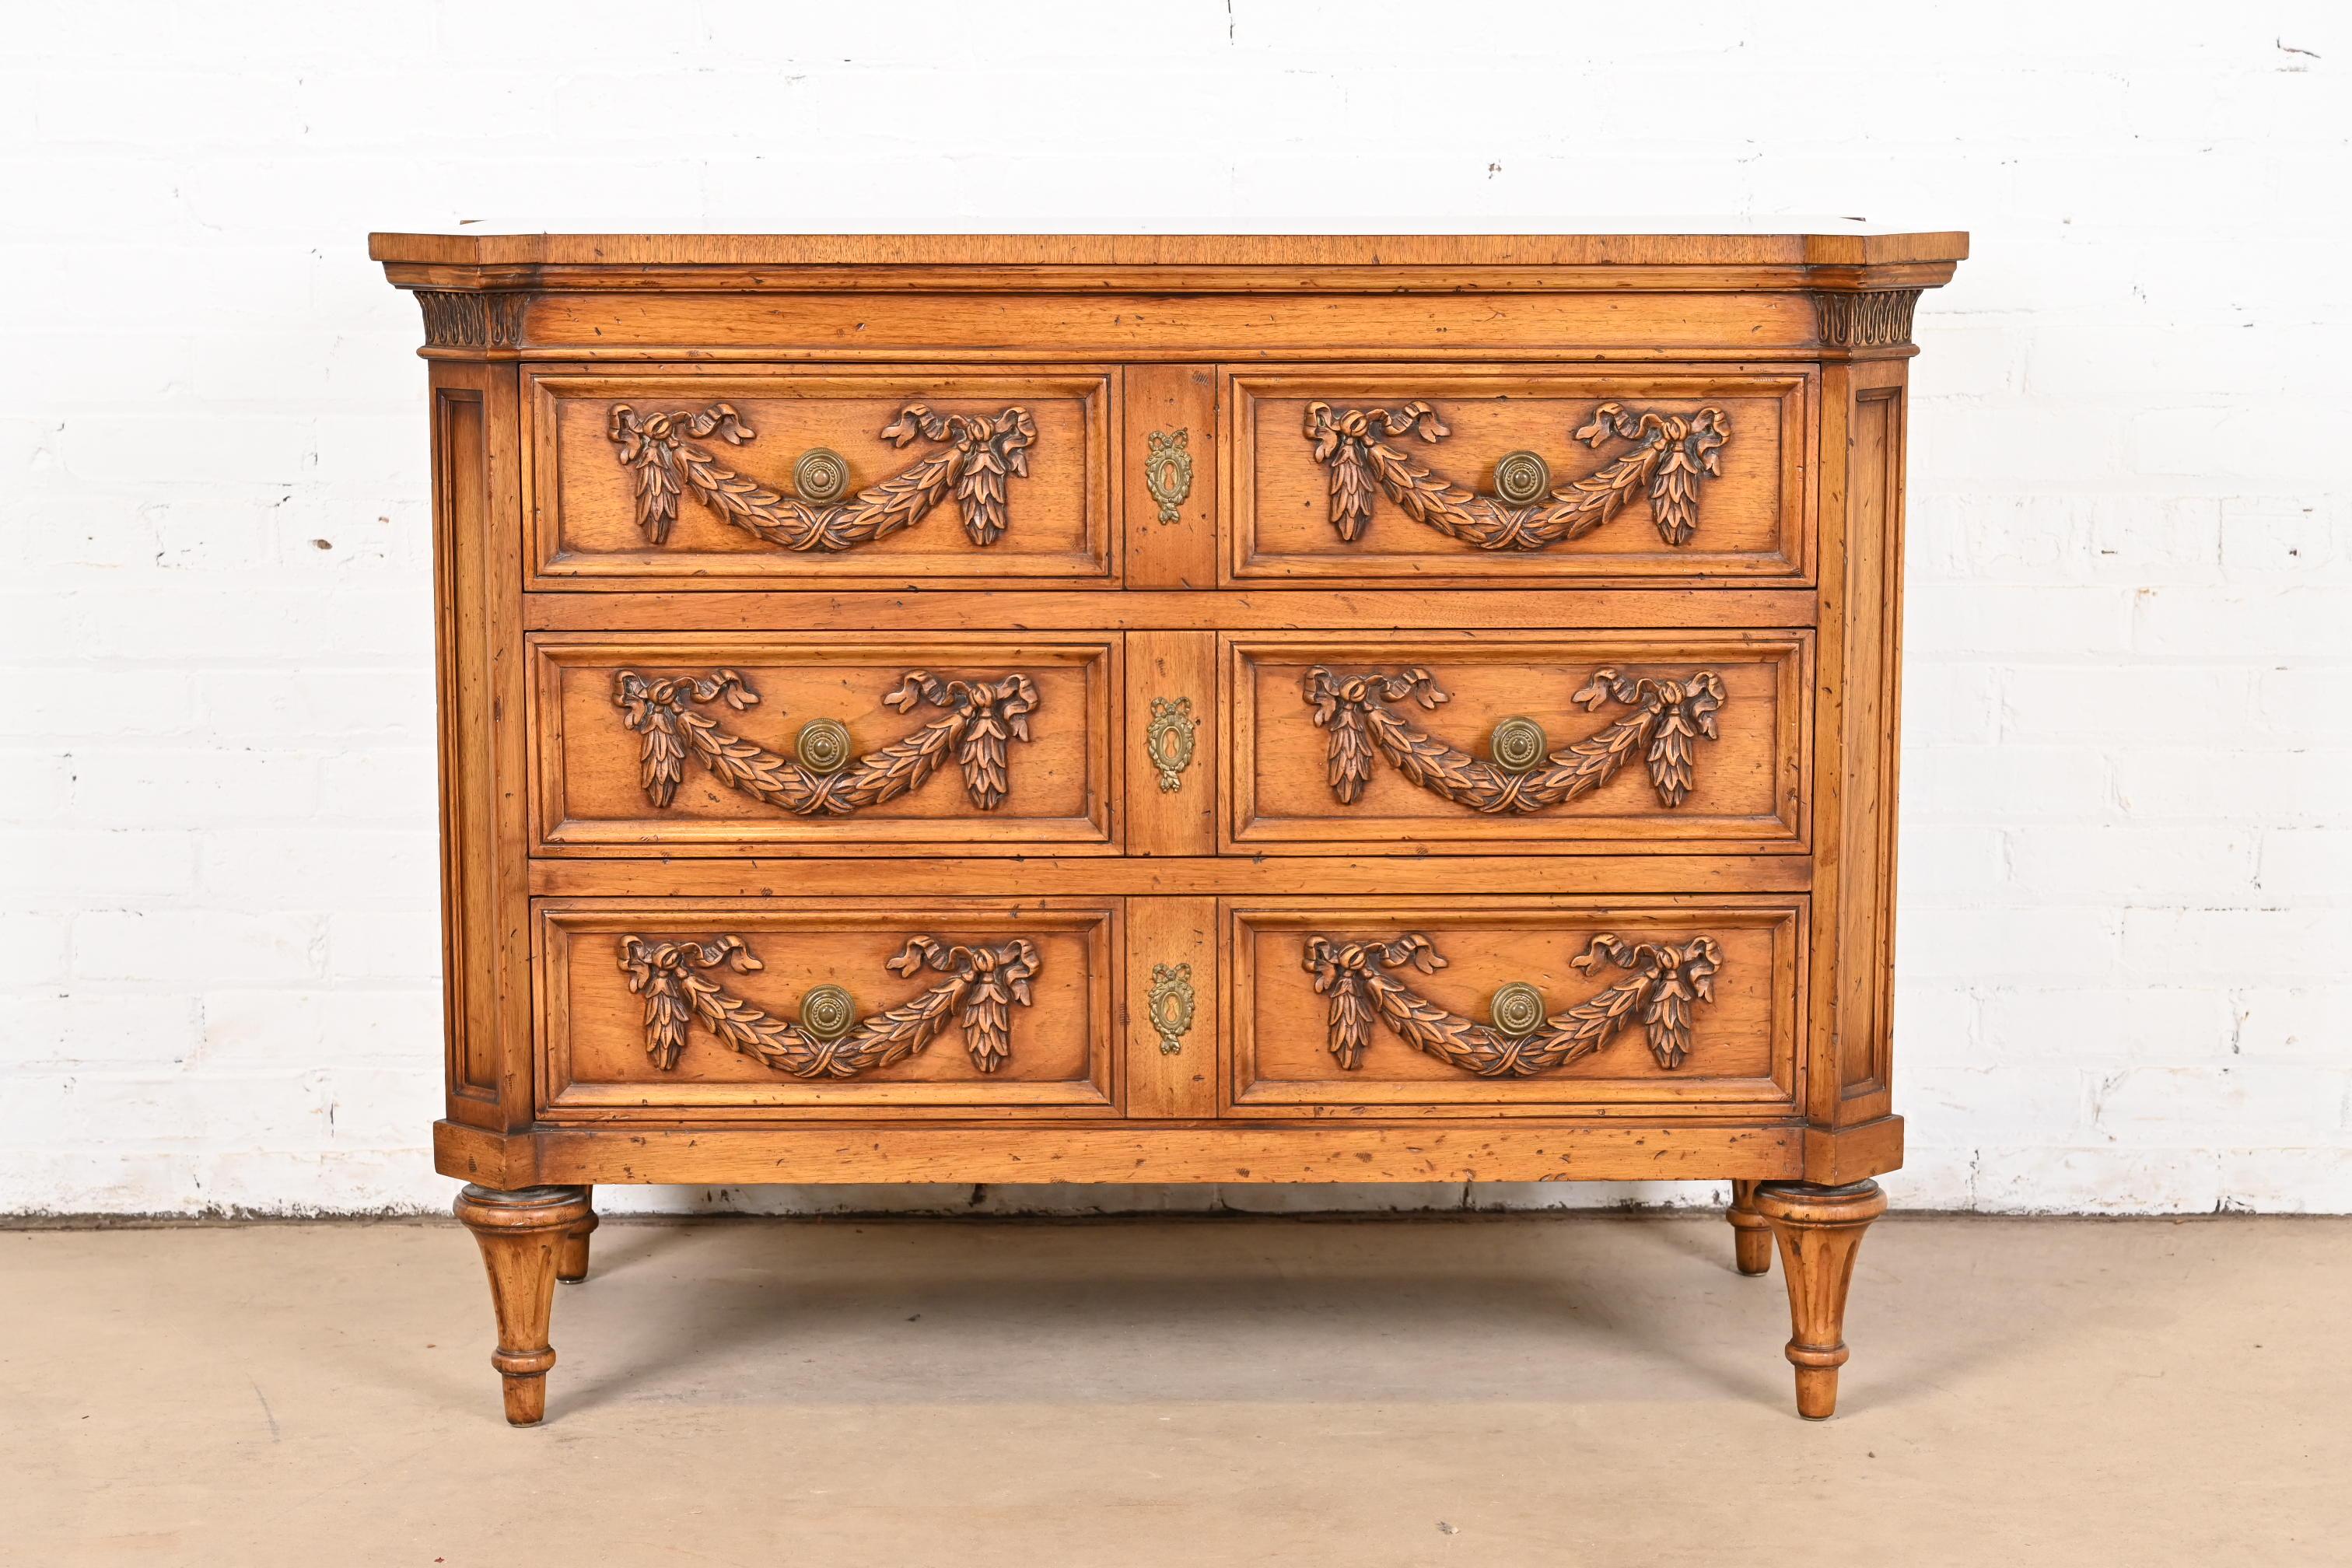 Karges French Regency Louis XVI Burled Walnut Dresser or Chest of Drawers In Good Condition For Sale In South Bend, IN